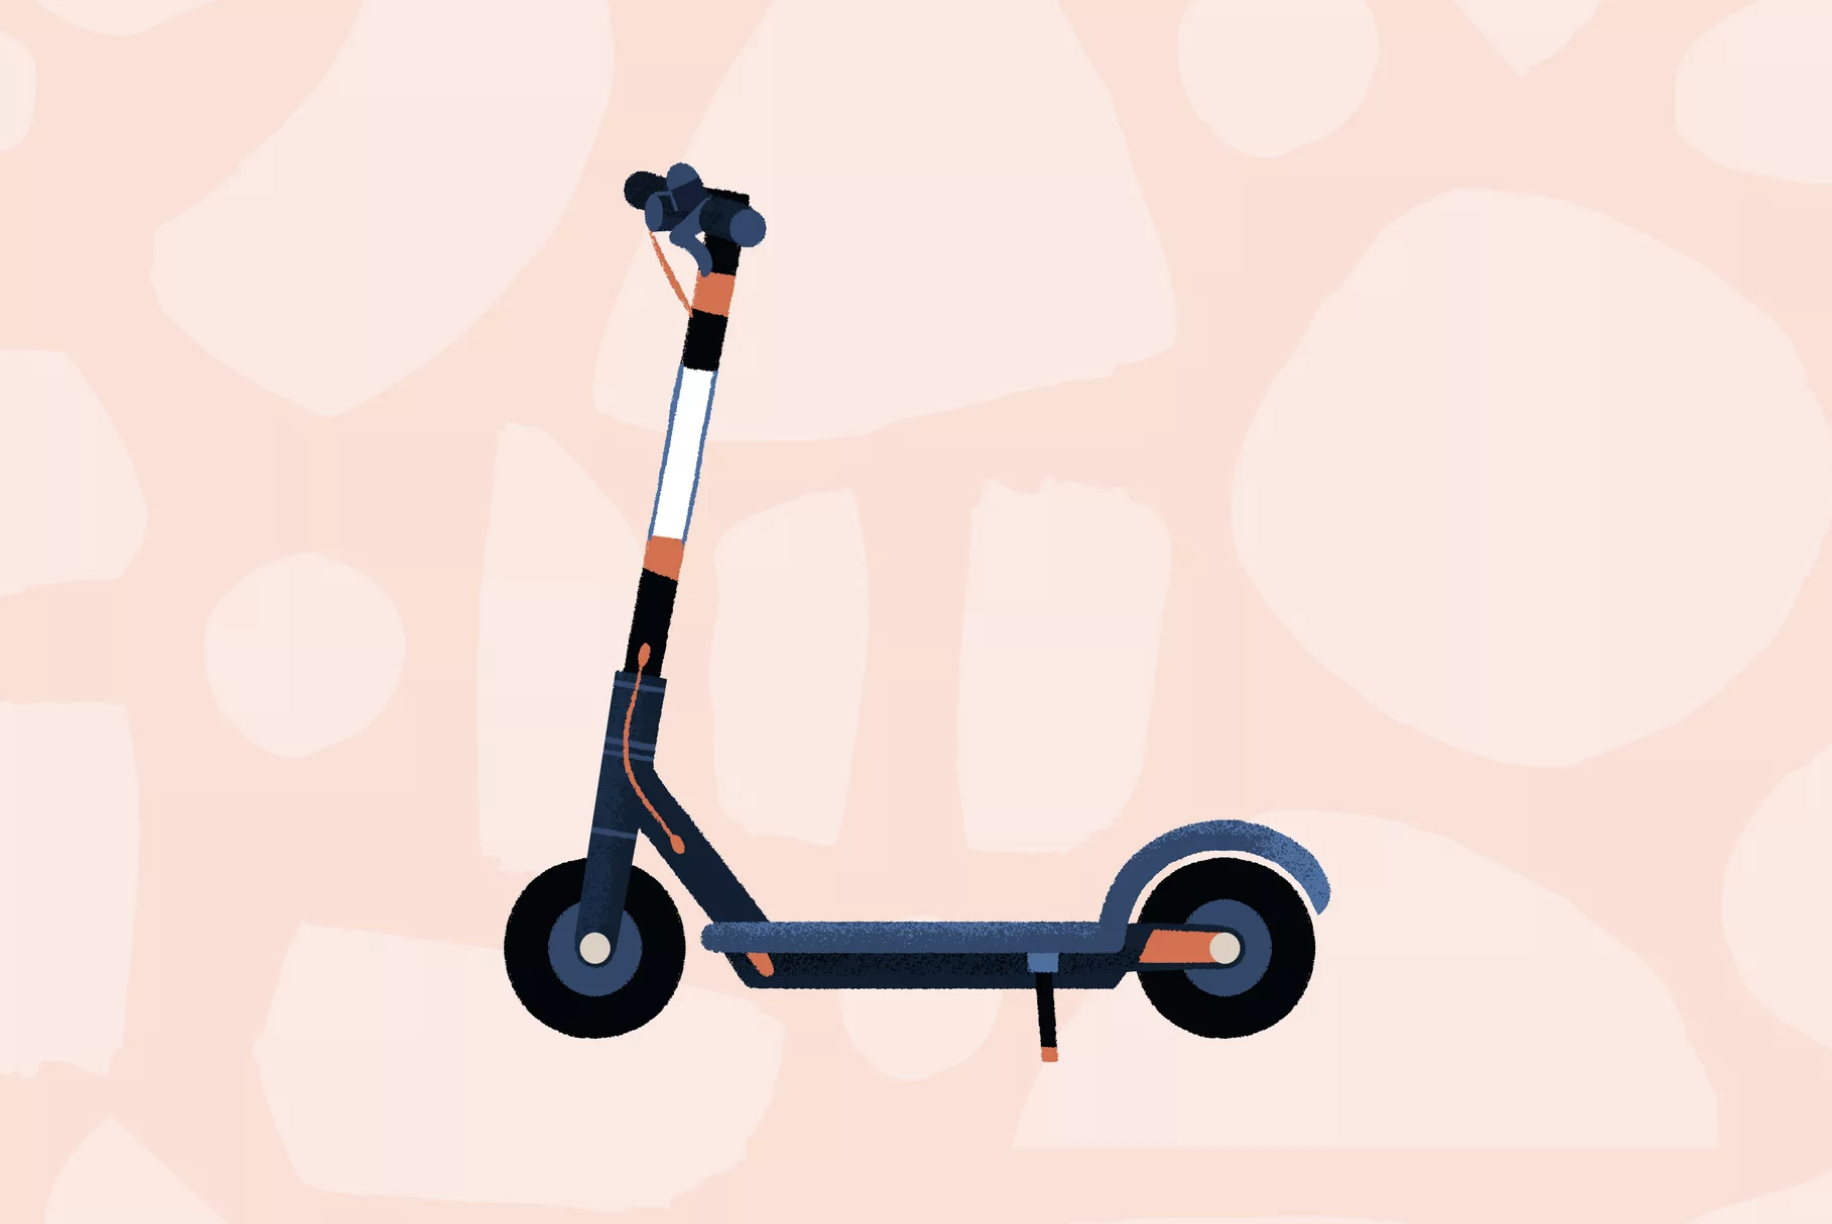 A graphic illustration of a generic black, white, and orange electric scooter, viewed from the side over a pink patterned backdrop.